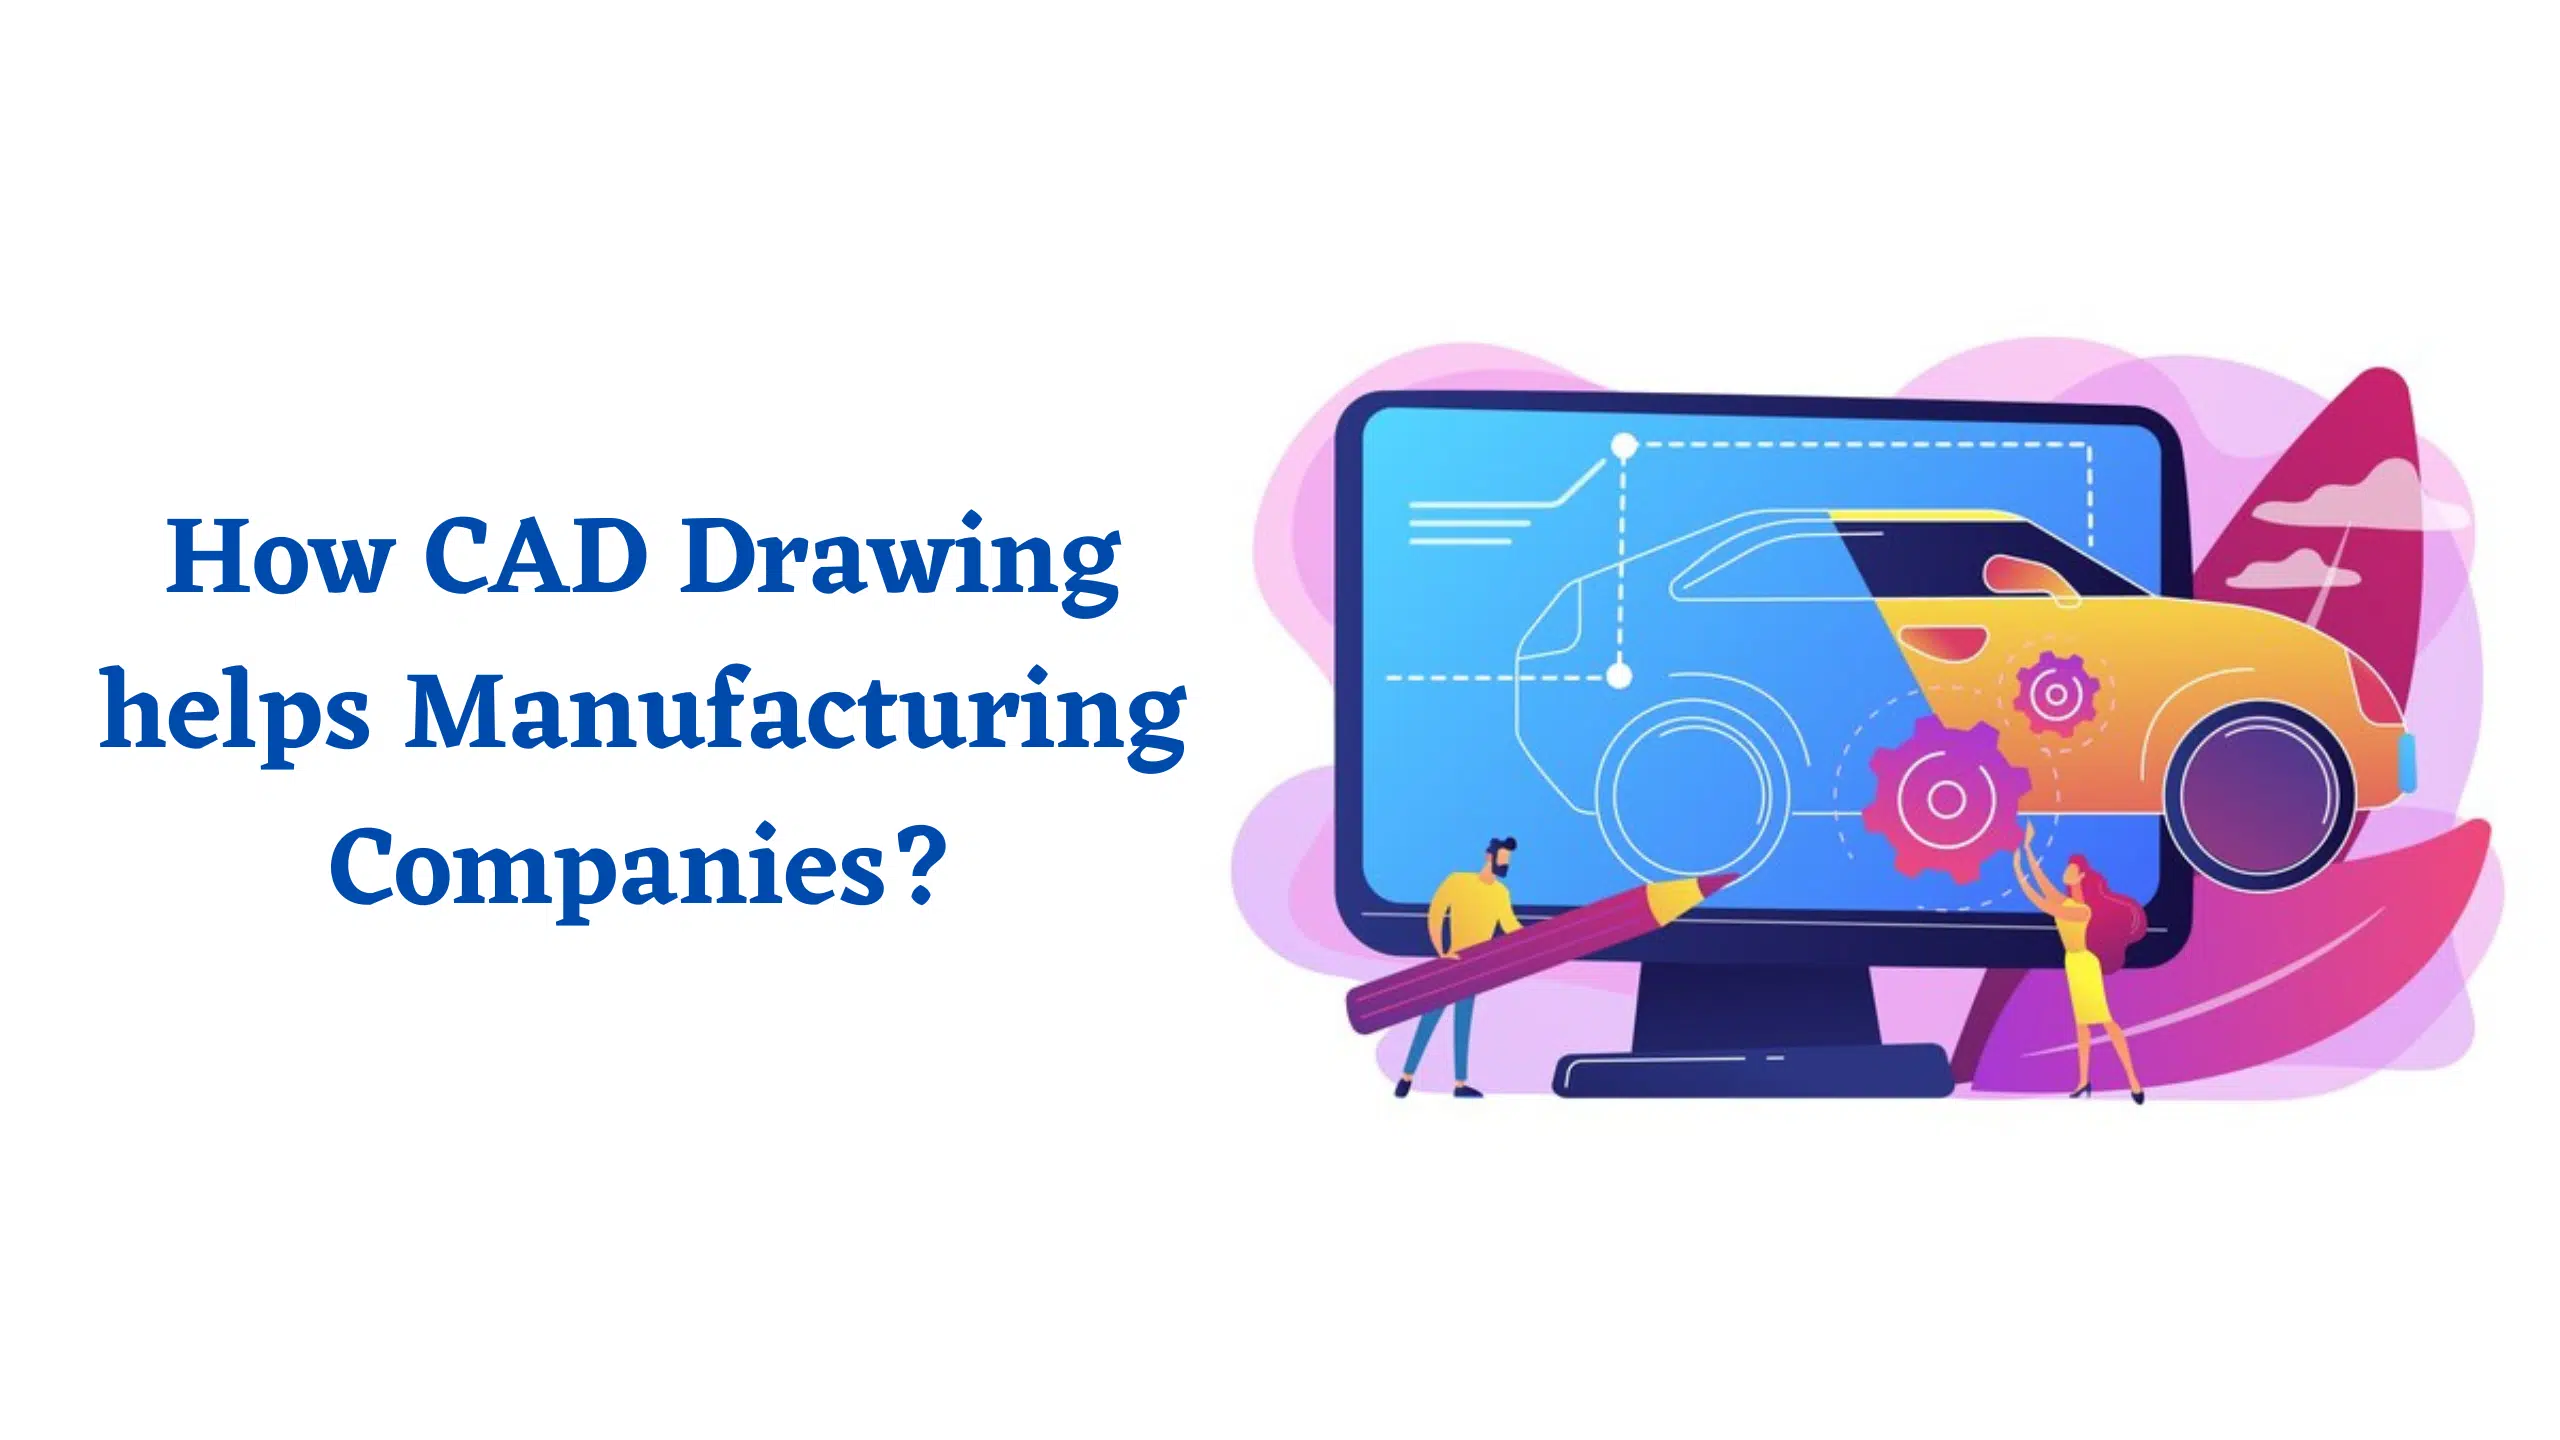 How CAD Drawing helps Manufacturing Companies